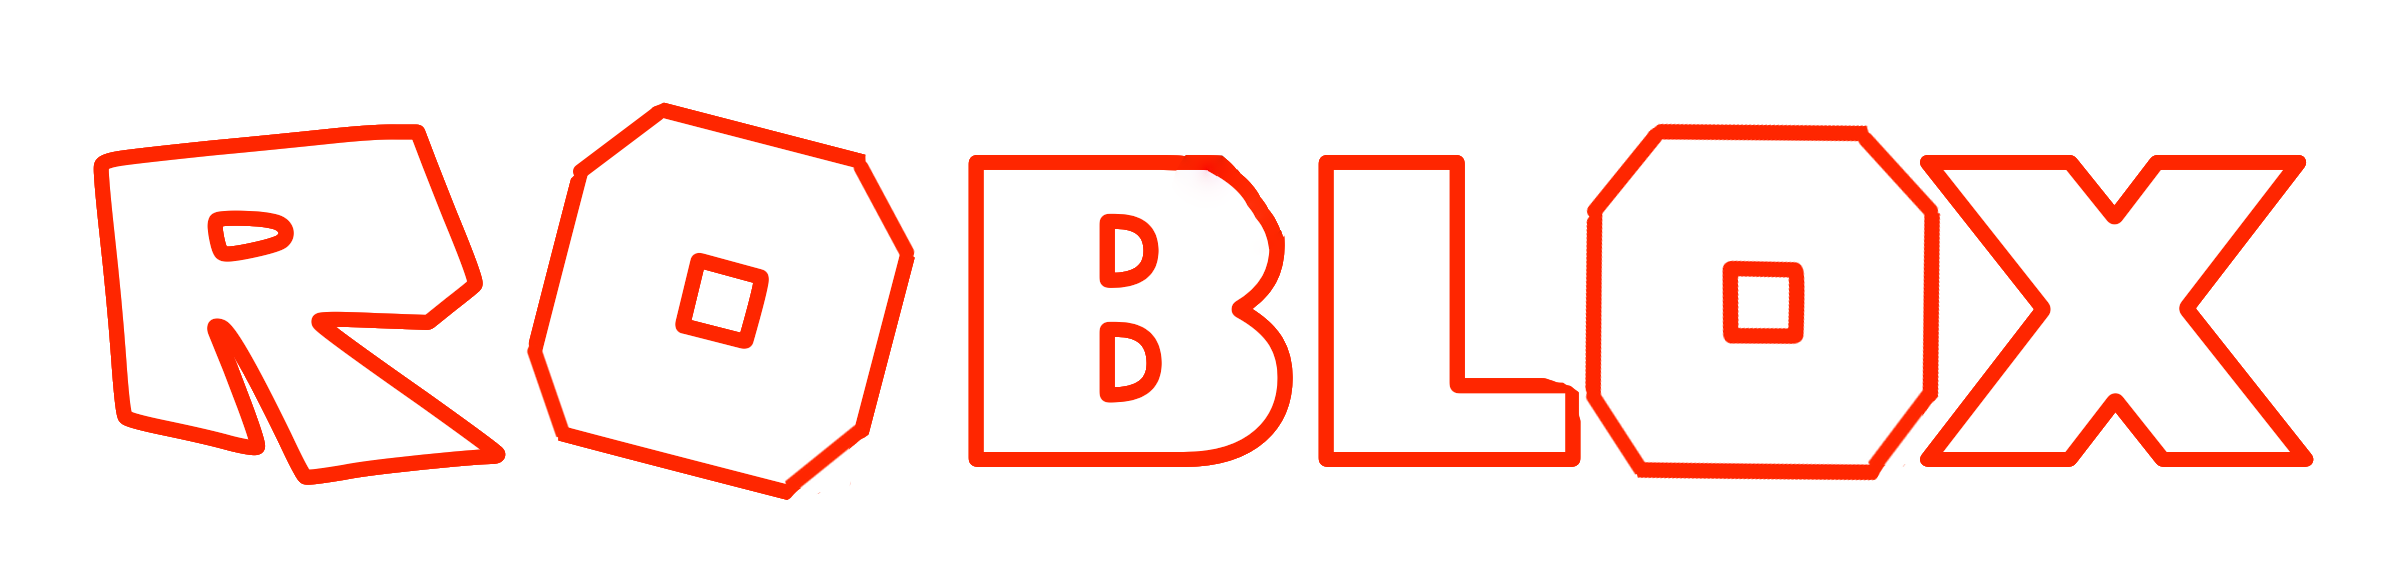 File:Roblox Logo 2021.png - Wikimedia Commons